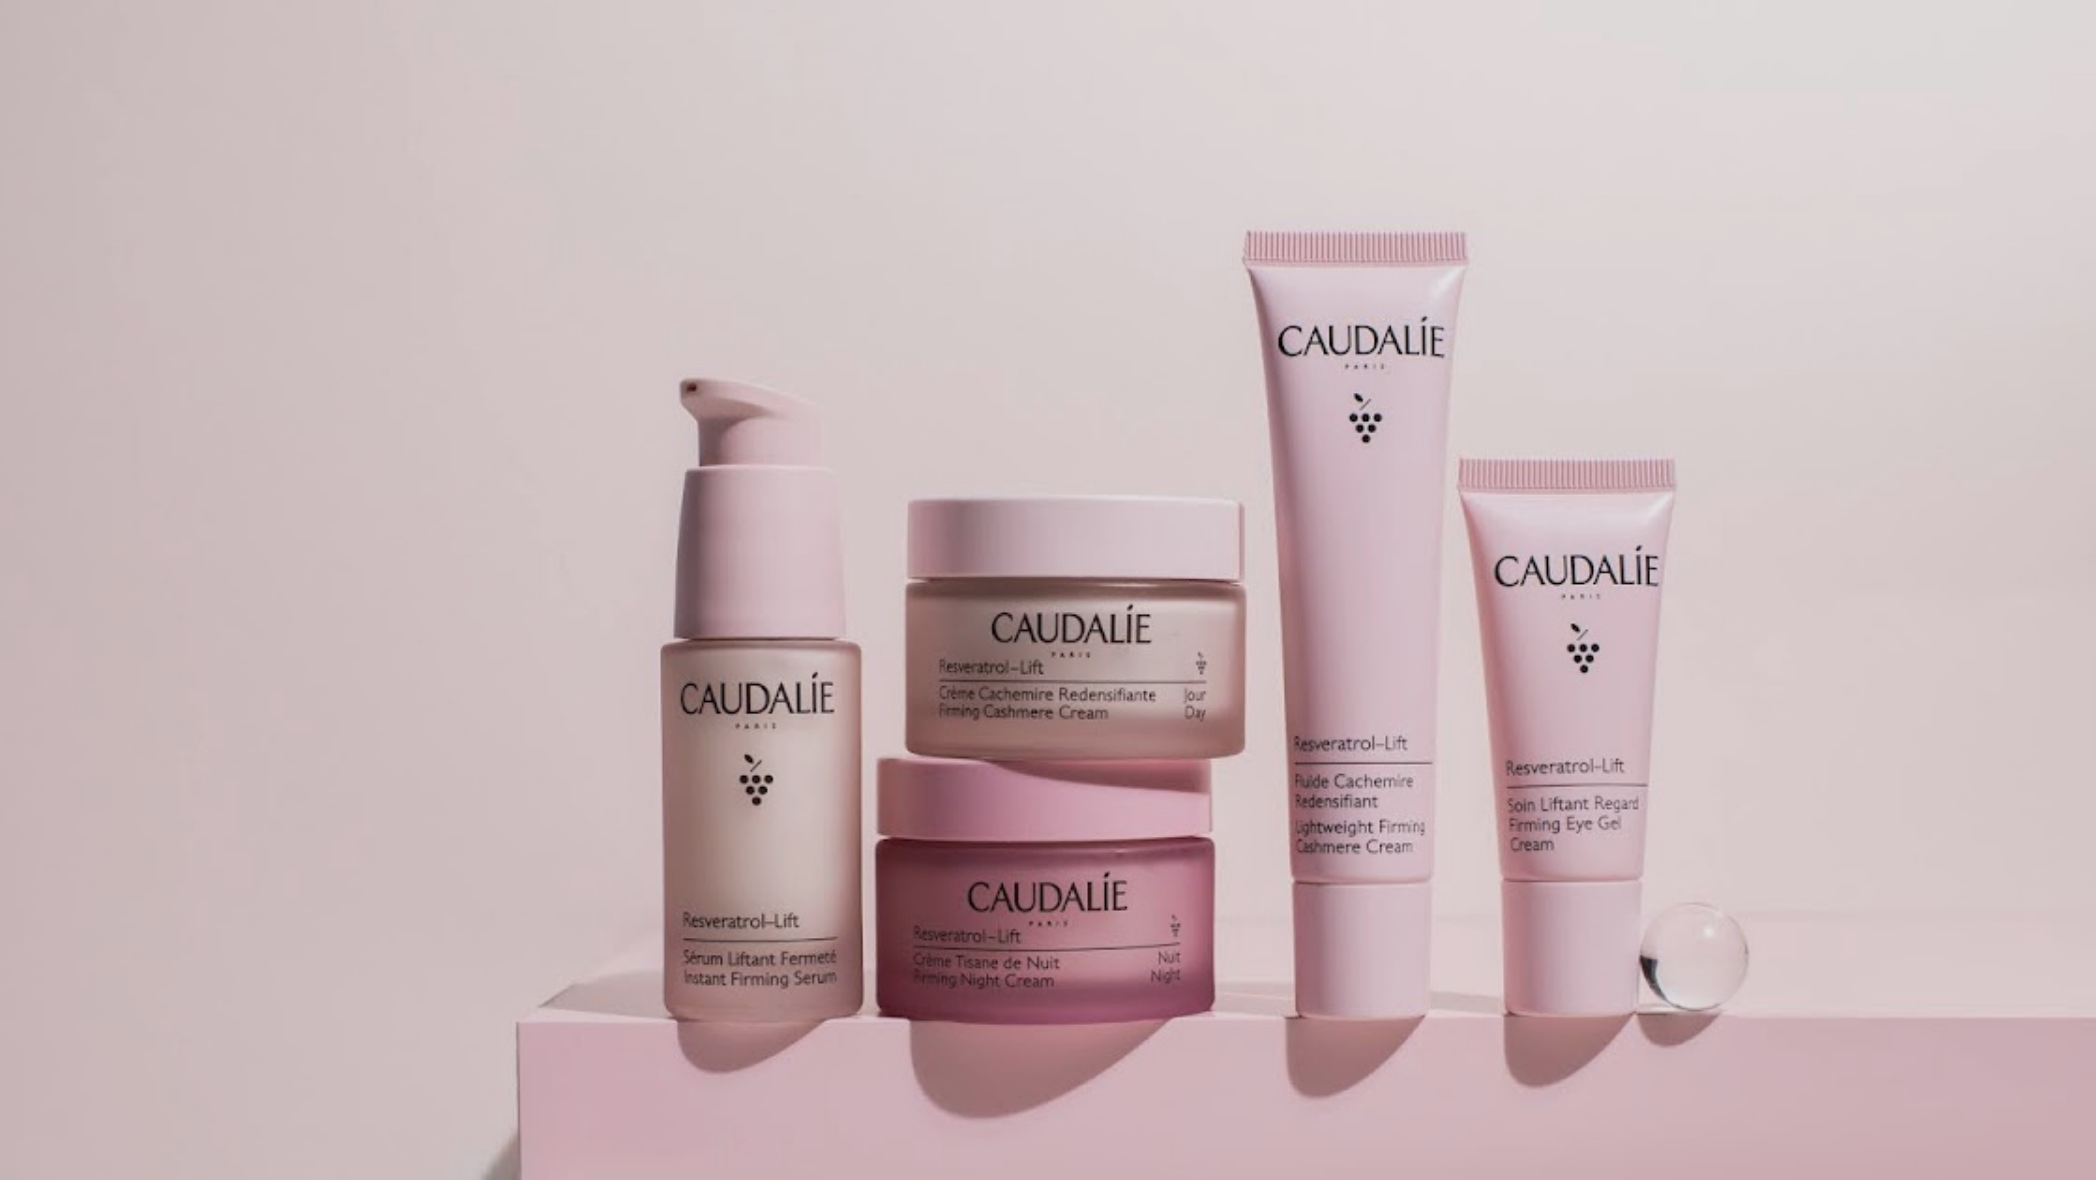 Caudalie or the age defying properties of grapes